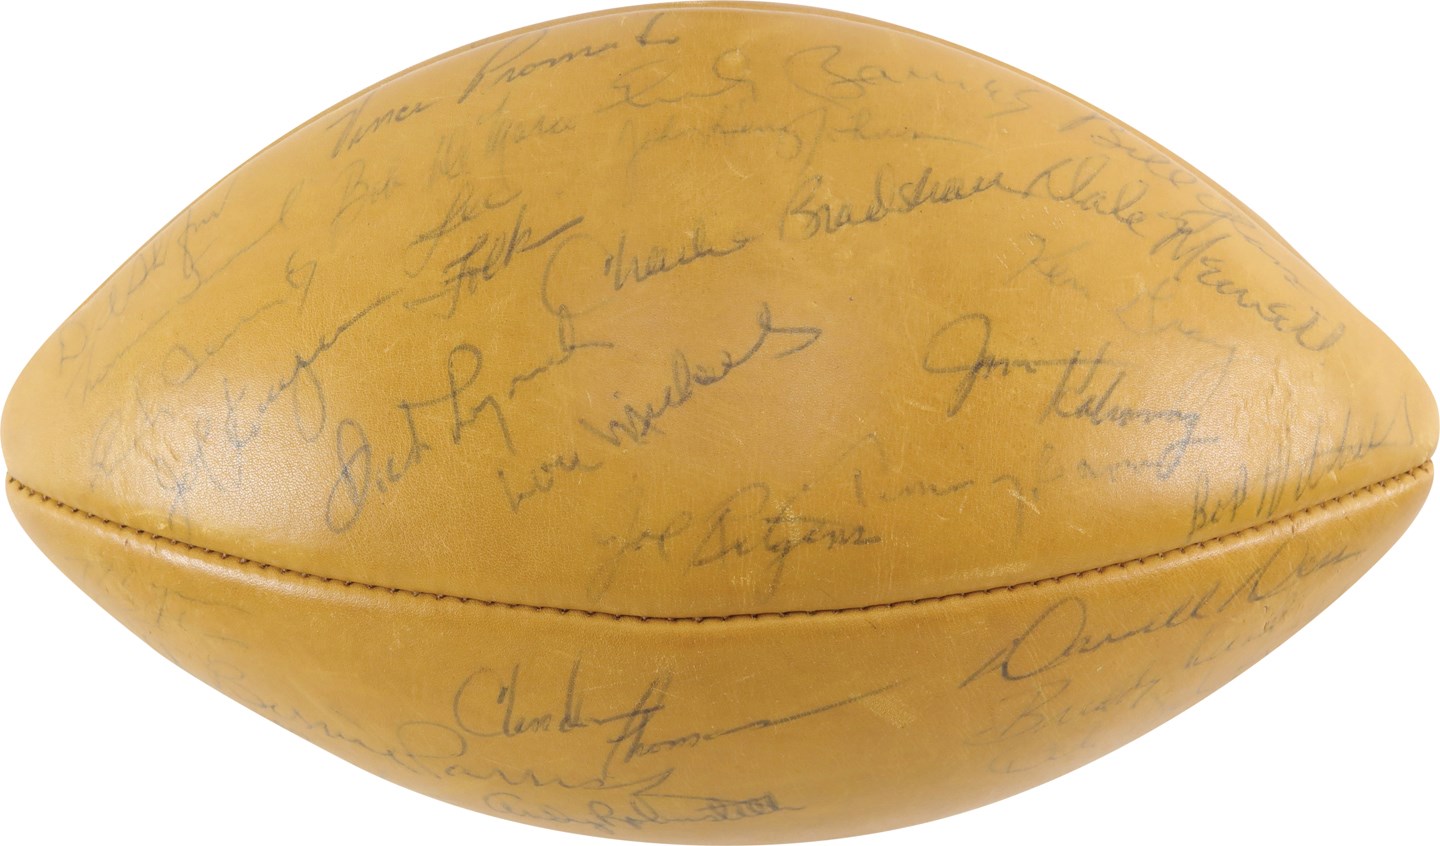 - 1963 Pro Bowl Team-Signed Football with Jim Brown (JSA)